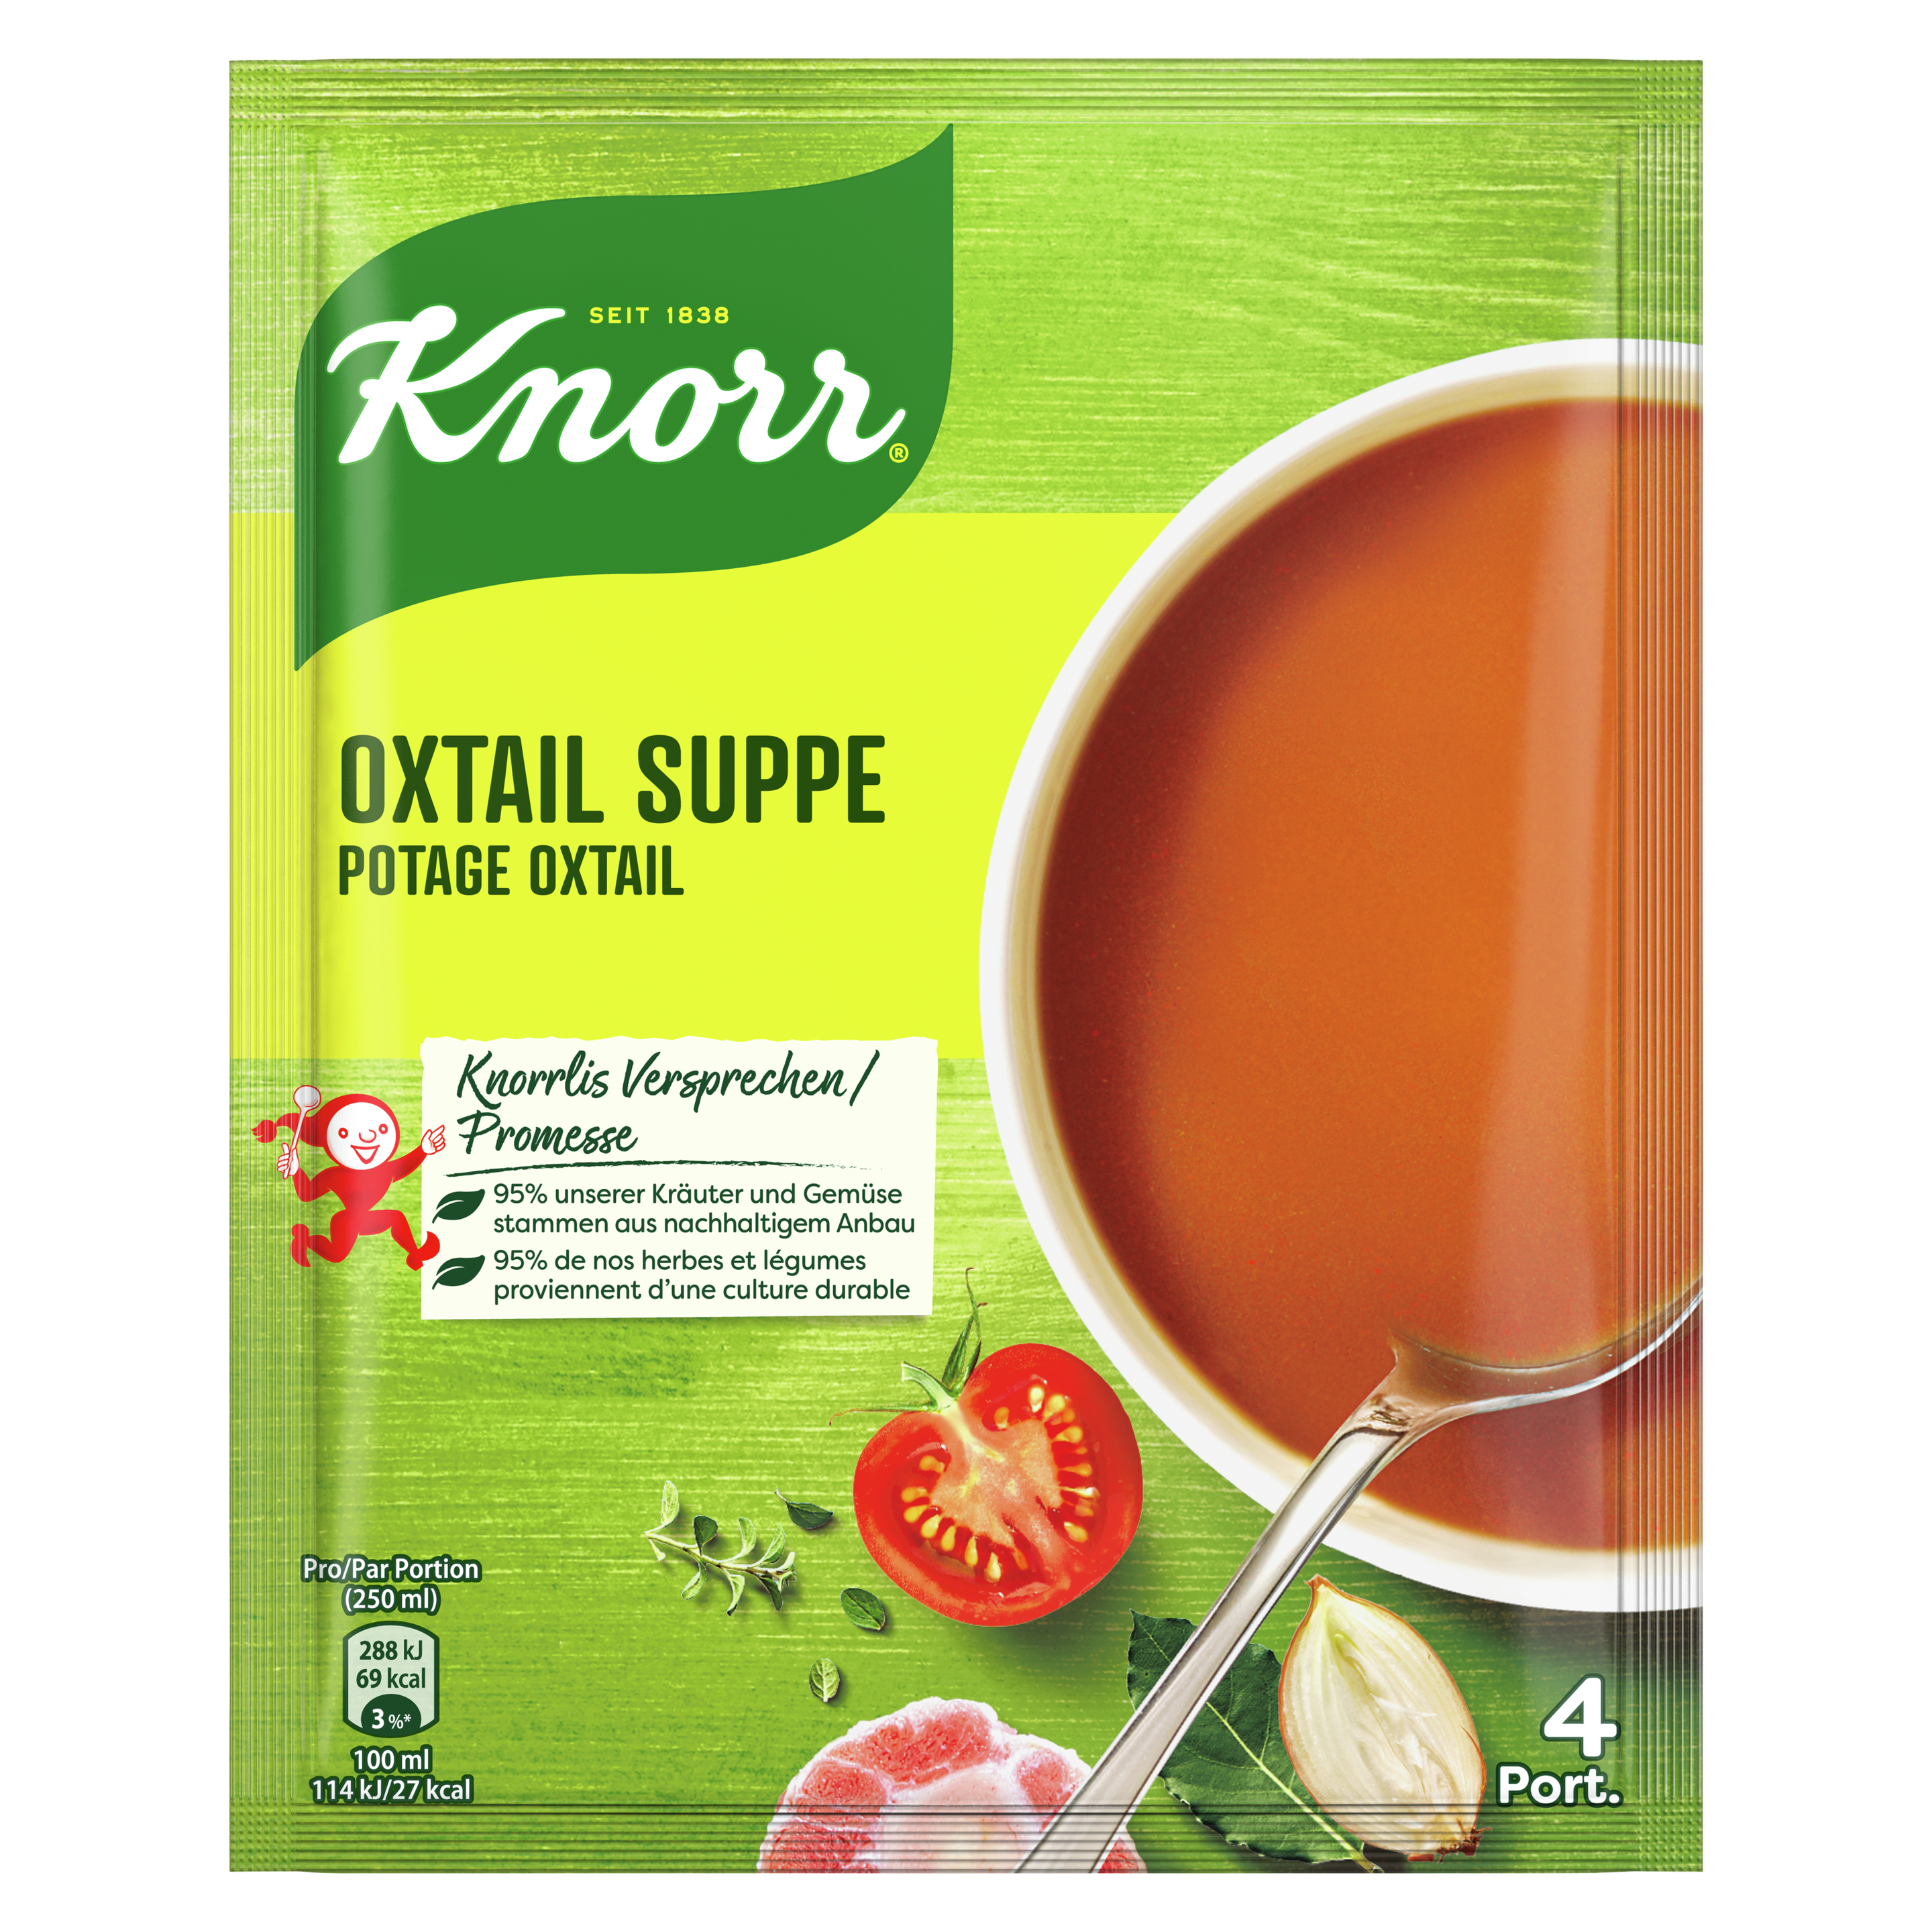 KNORR Oxtail Suppe Beutel 4 Portionen